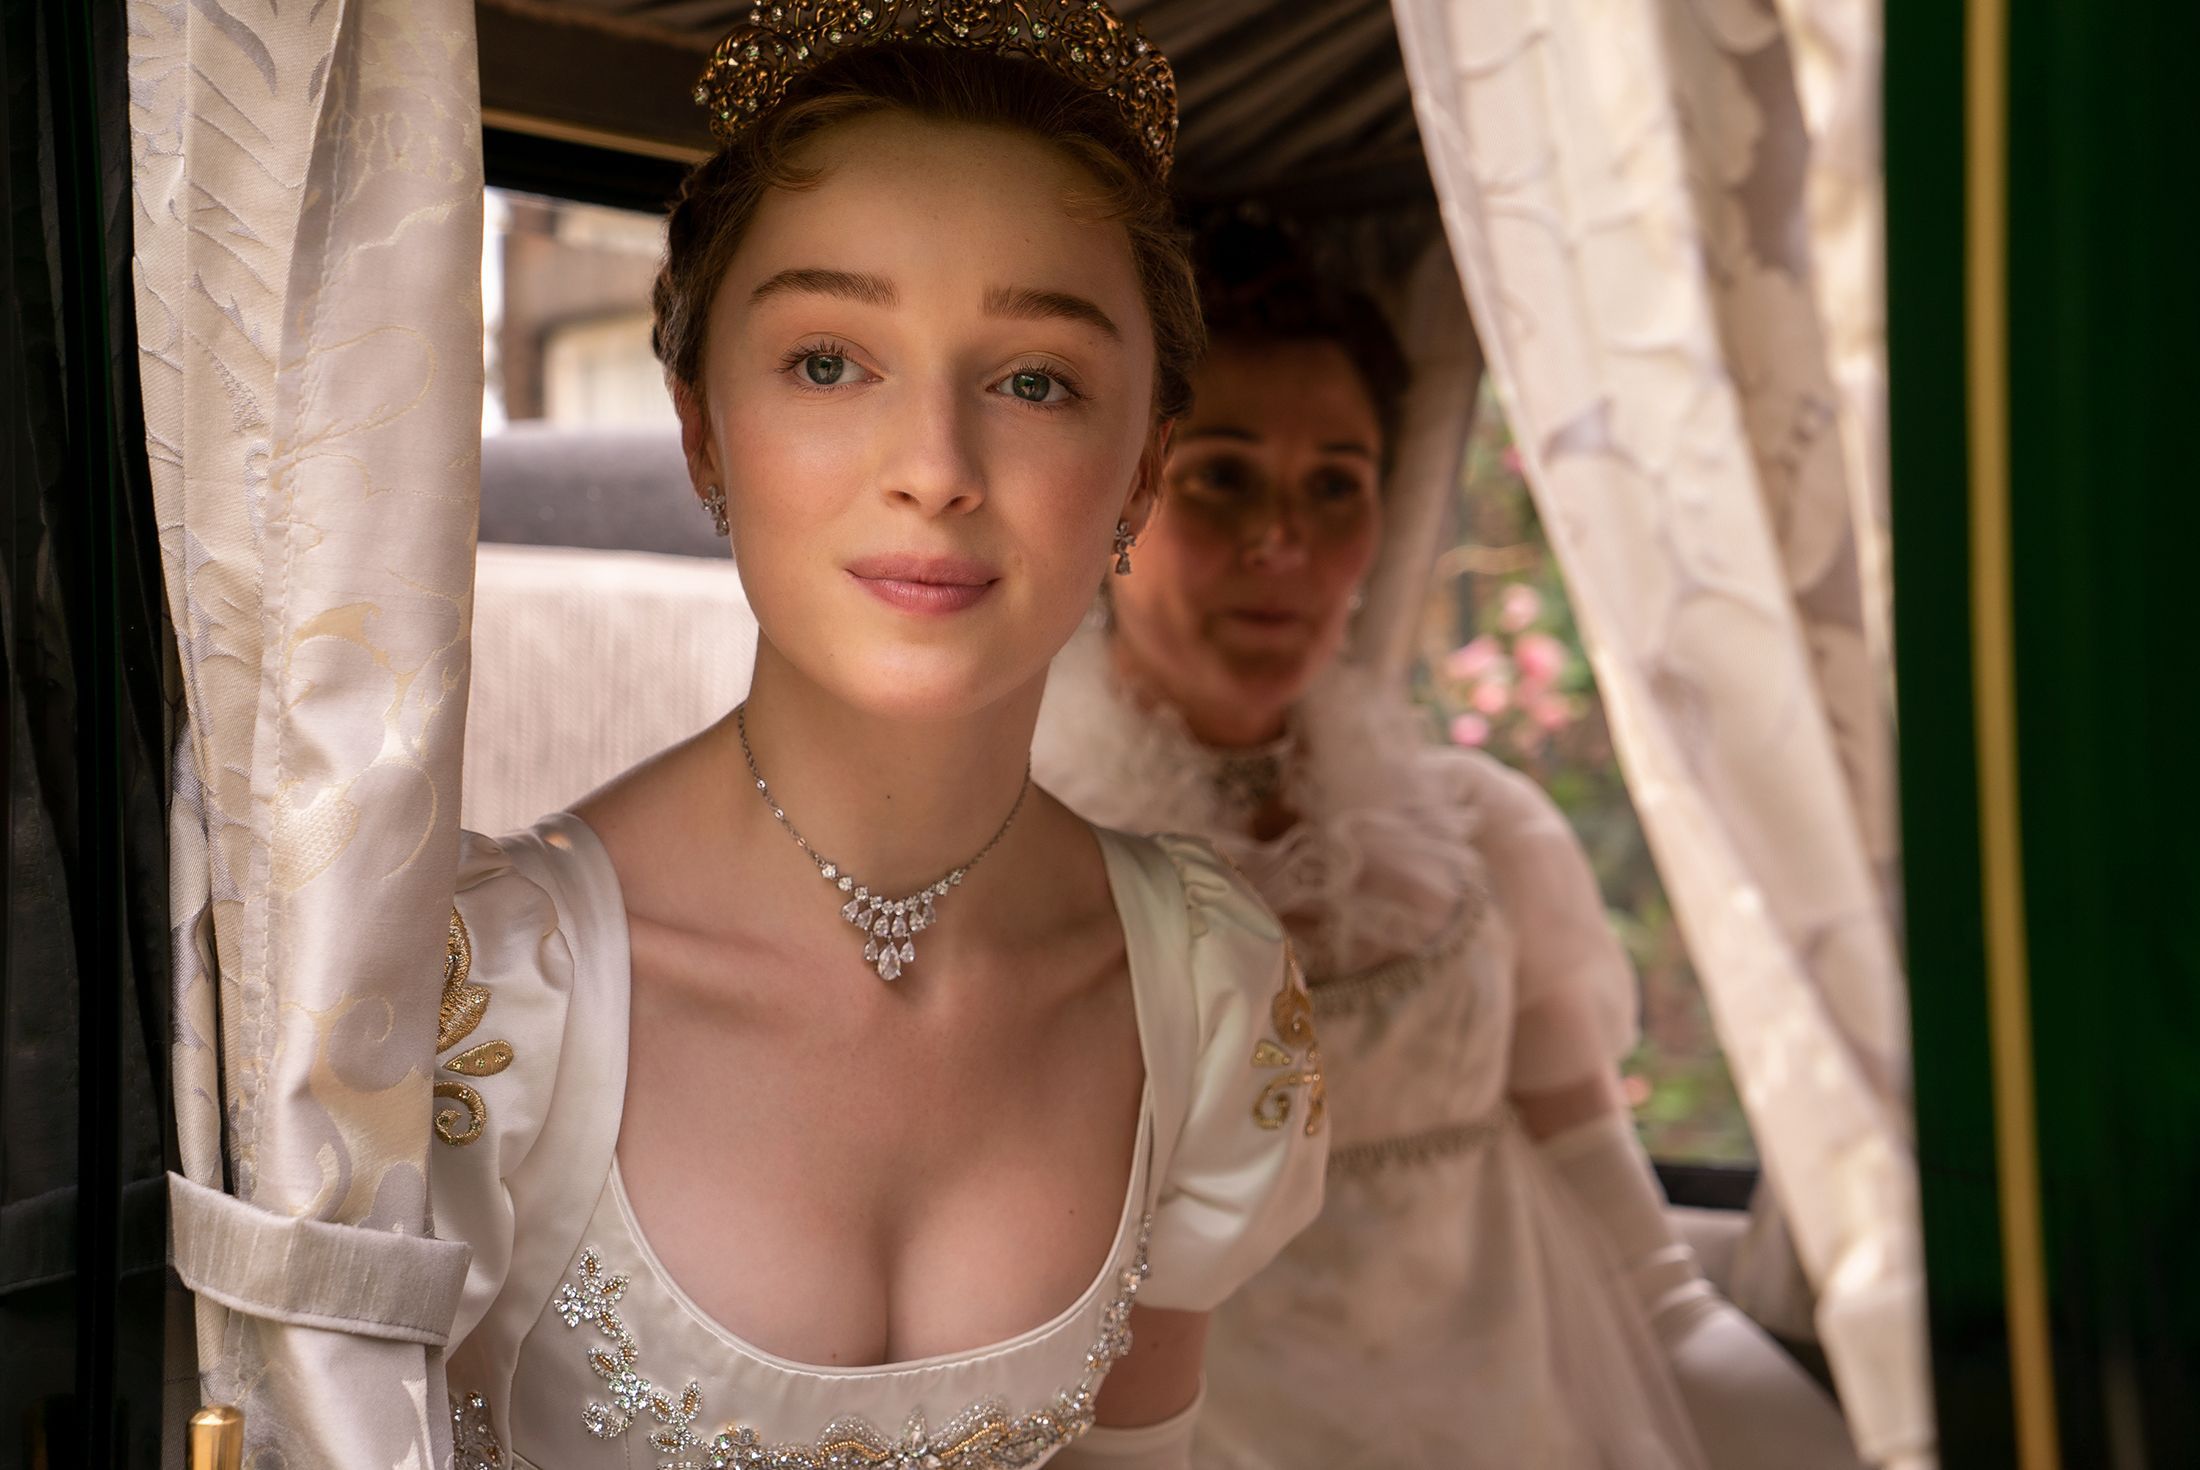 Bridgerton's Phoebe Dynevor says the show is too raunchy for her grandparents to watch